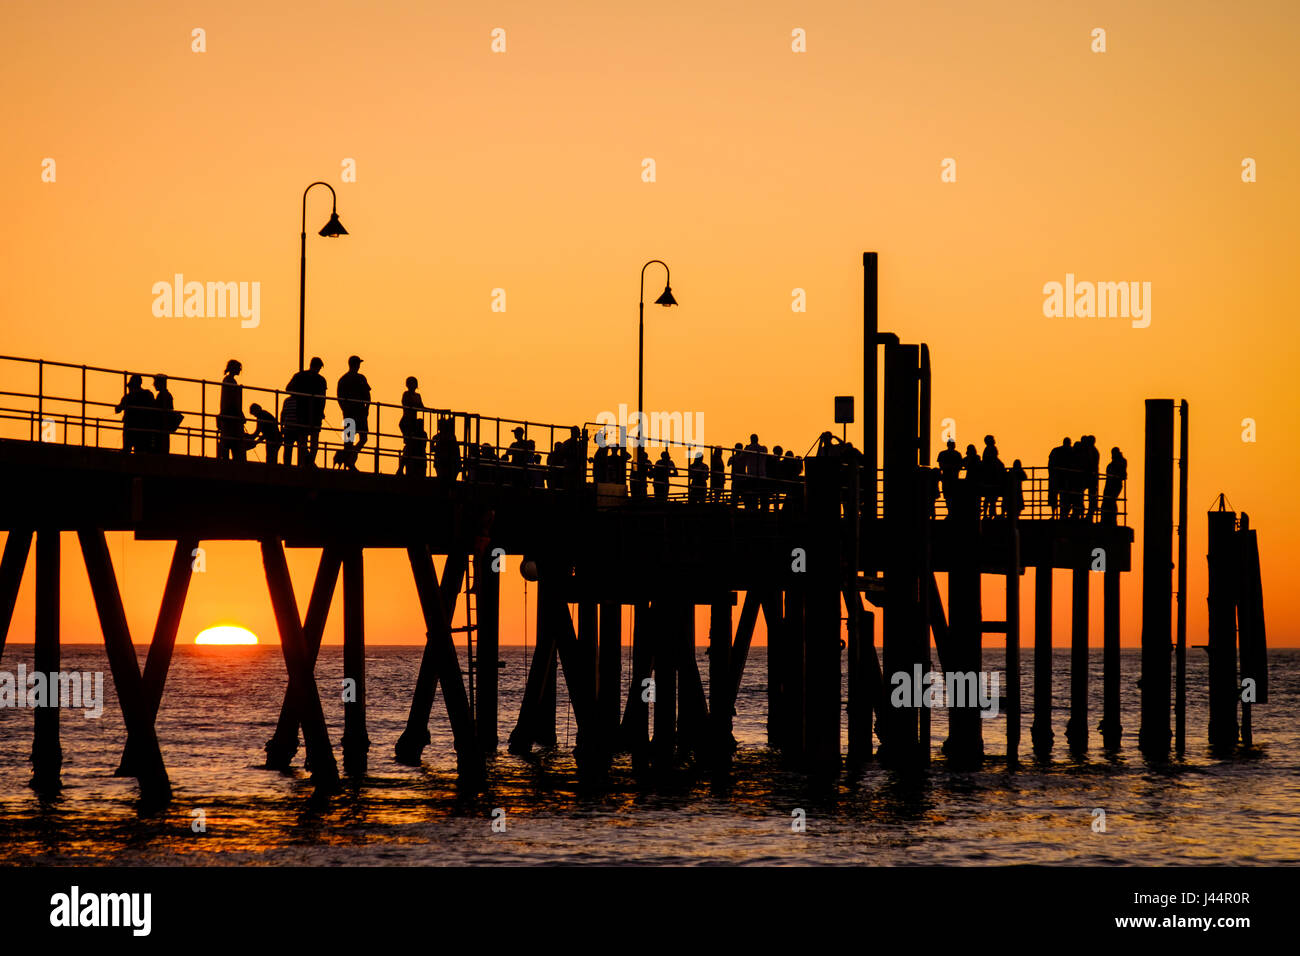 Glenelg beach jetty with people at sunset, Adelaide, South Australia Stock Photo